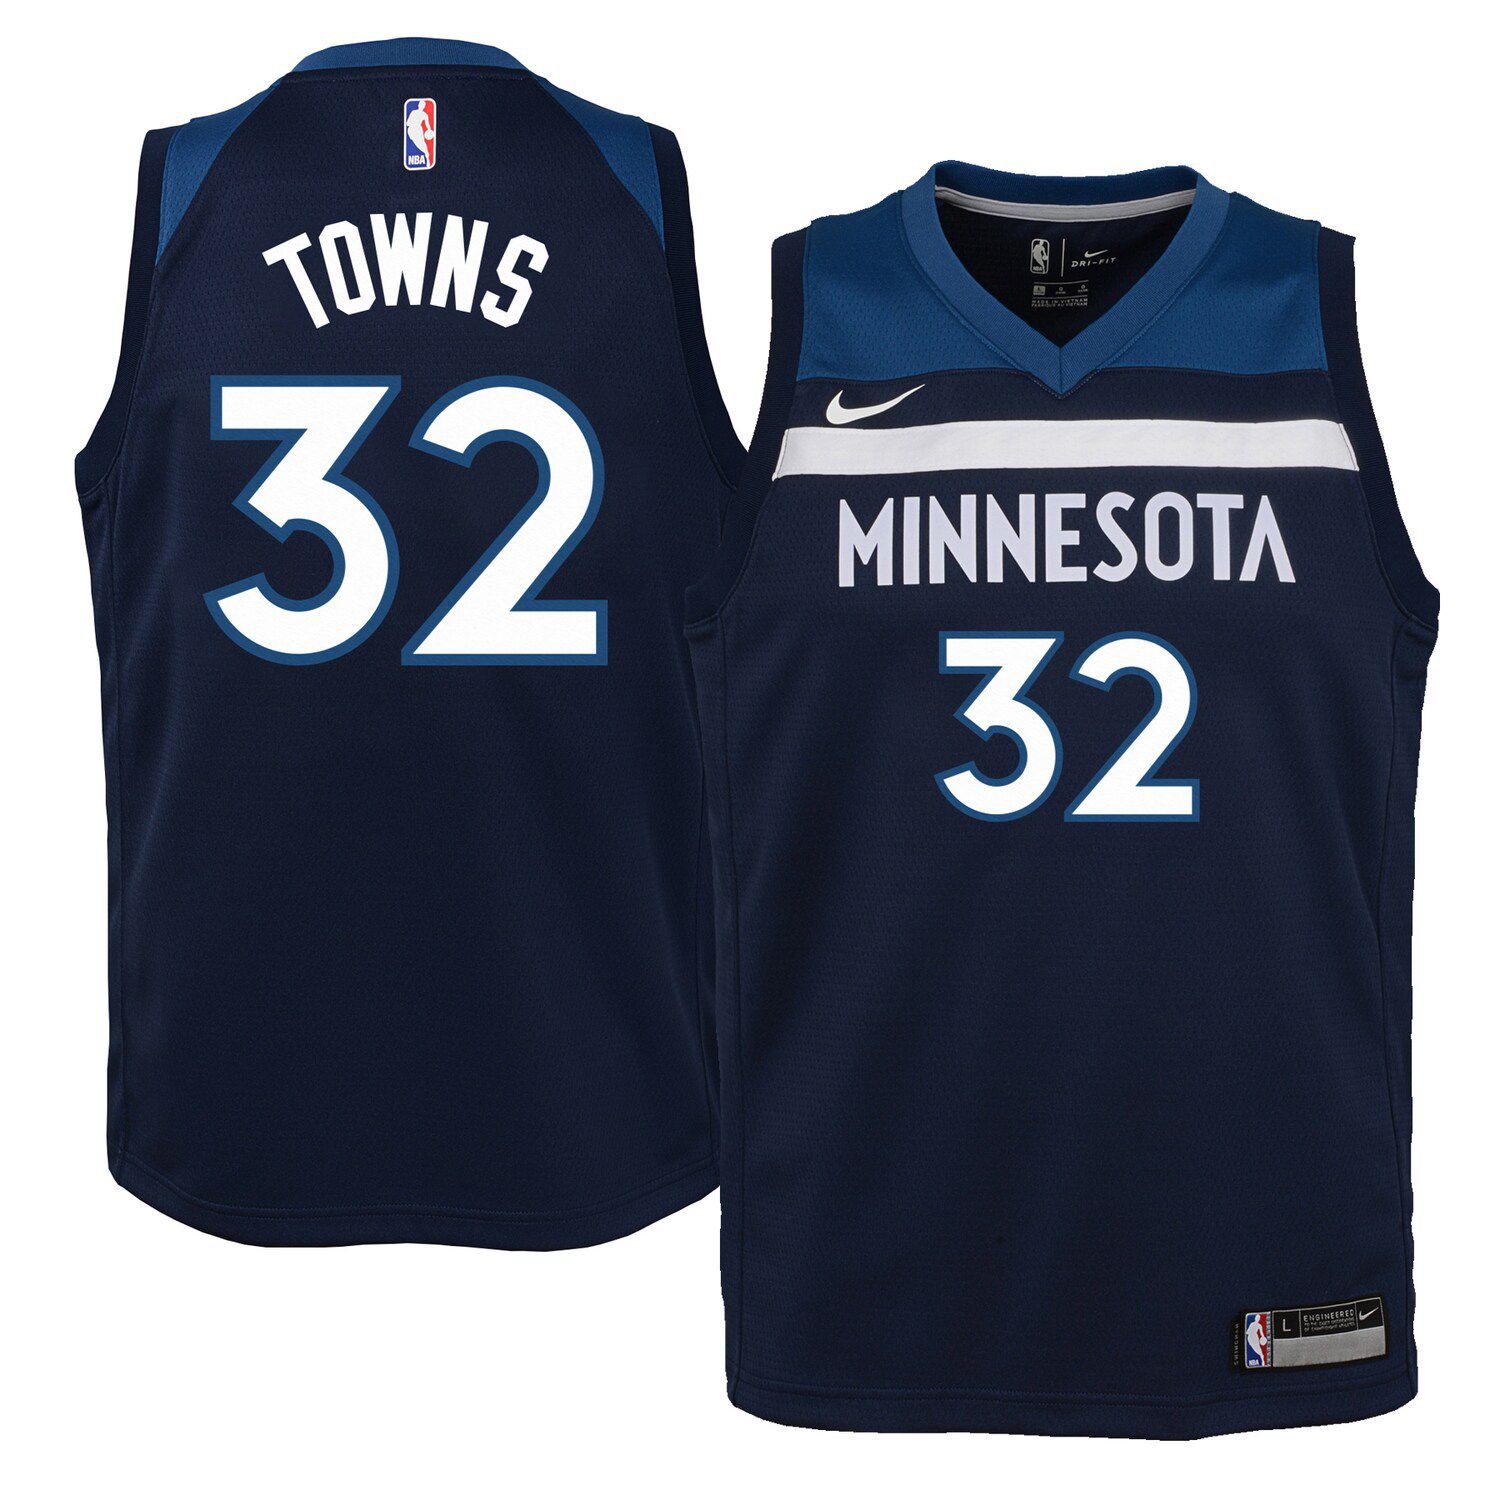 karl anthony towns purple jersey